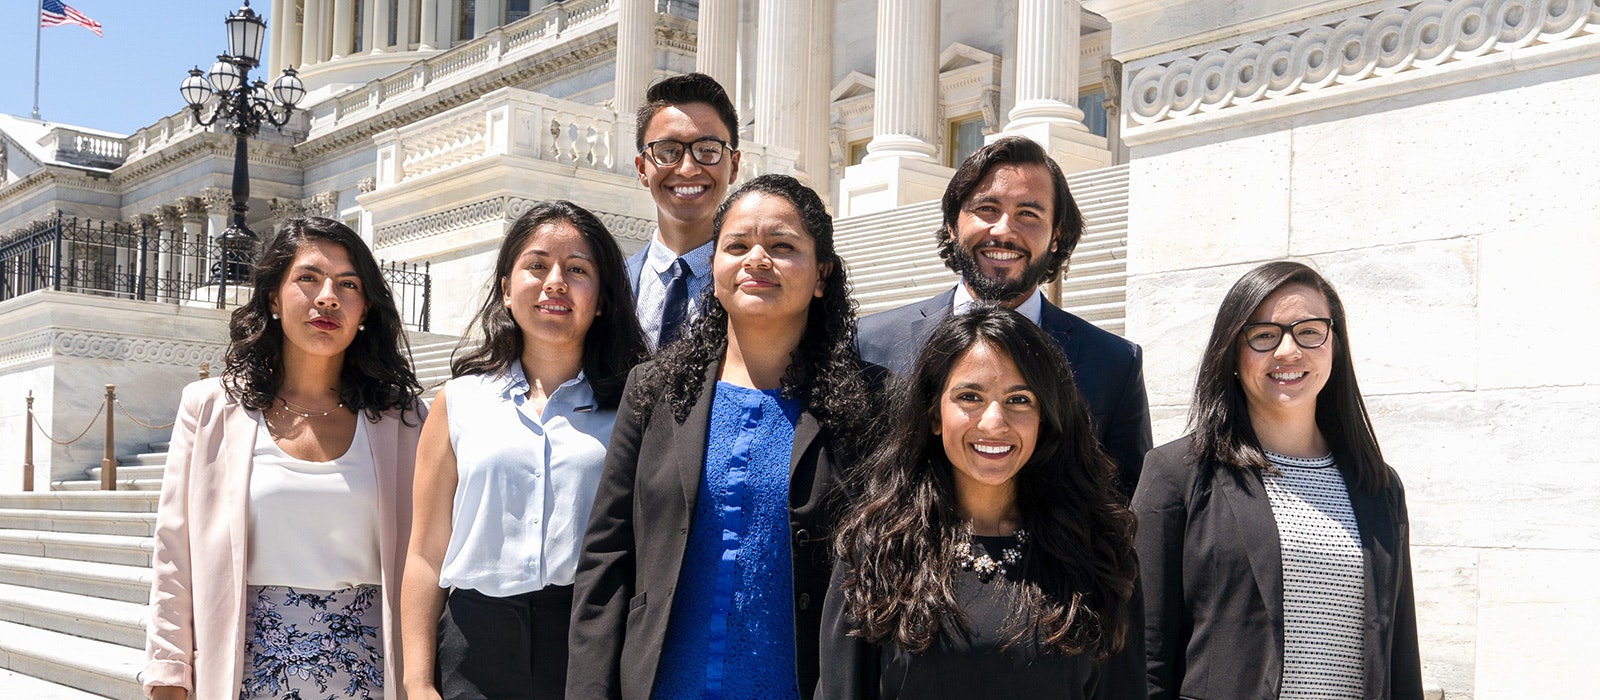 DACA Facts: Dreamers stand outside capitol building to tell Congress to pass a permanent legislative solution